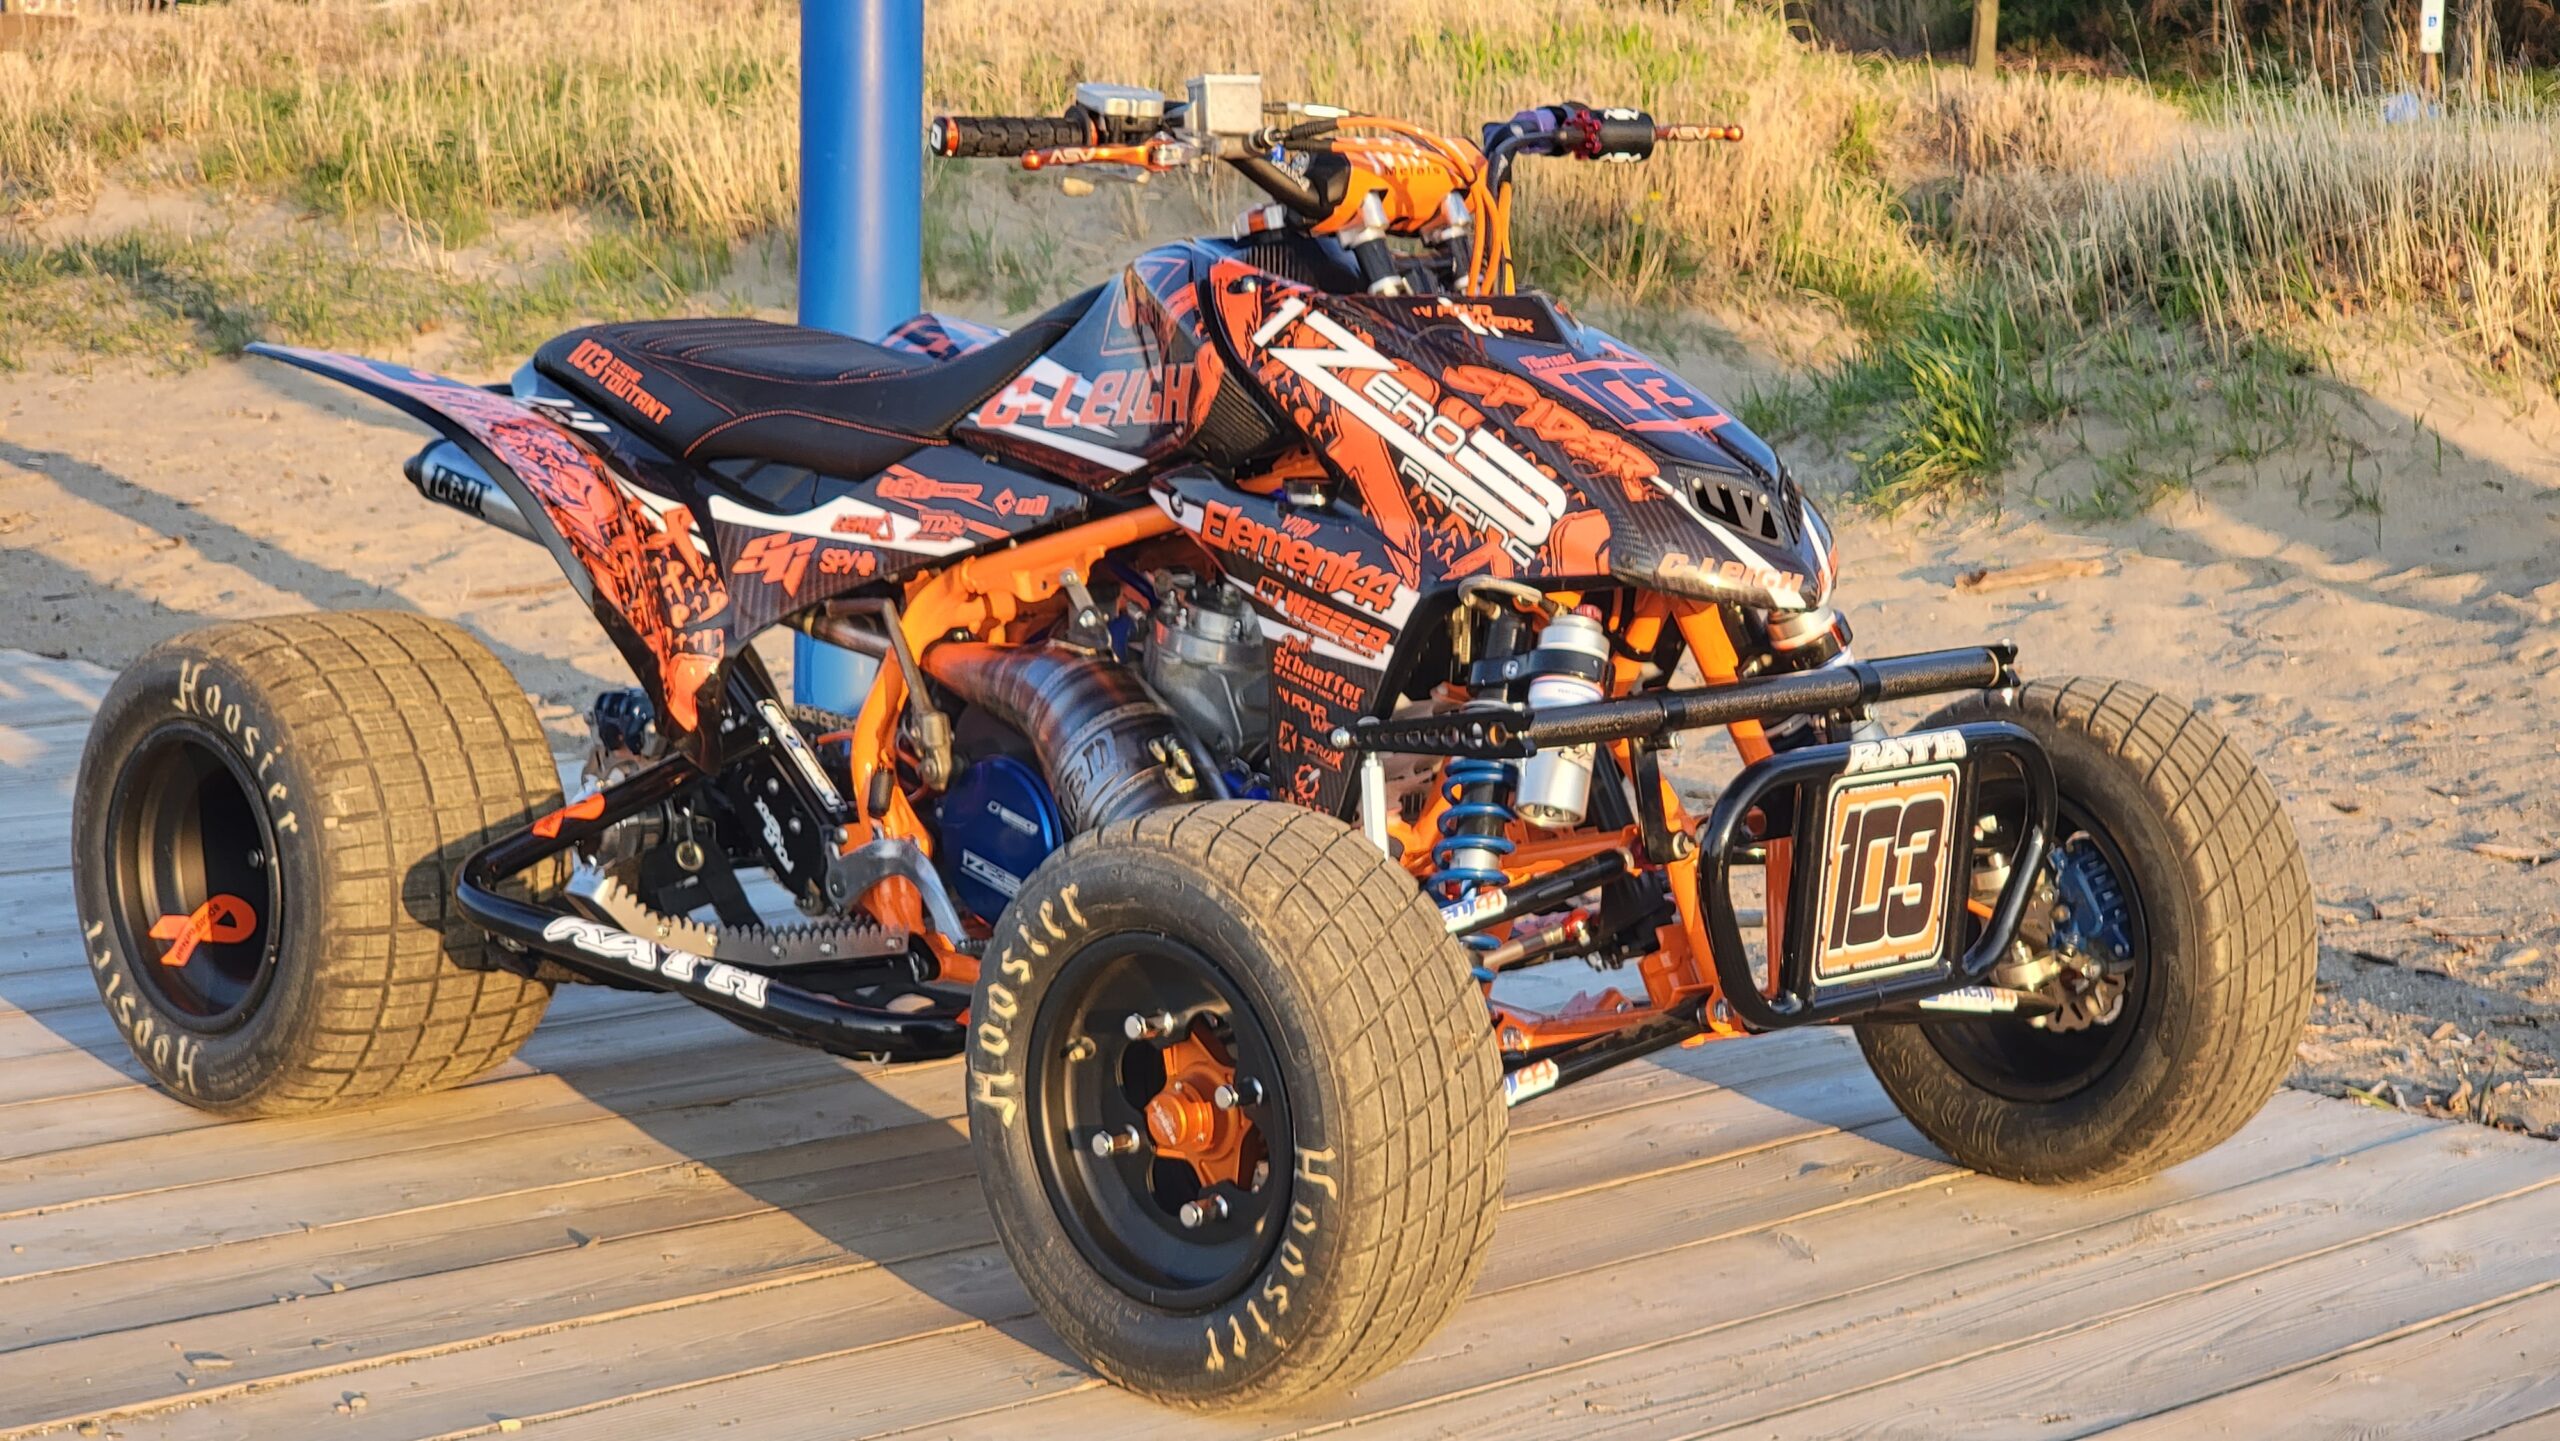 This is a Polaris Ranger in custom orange and black race livery.